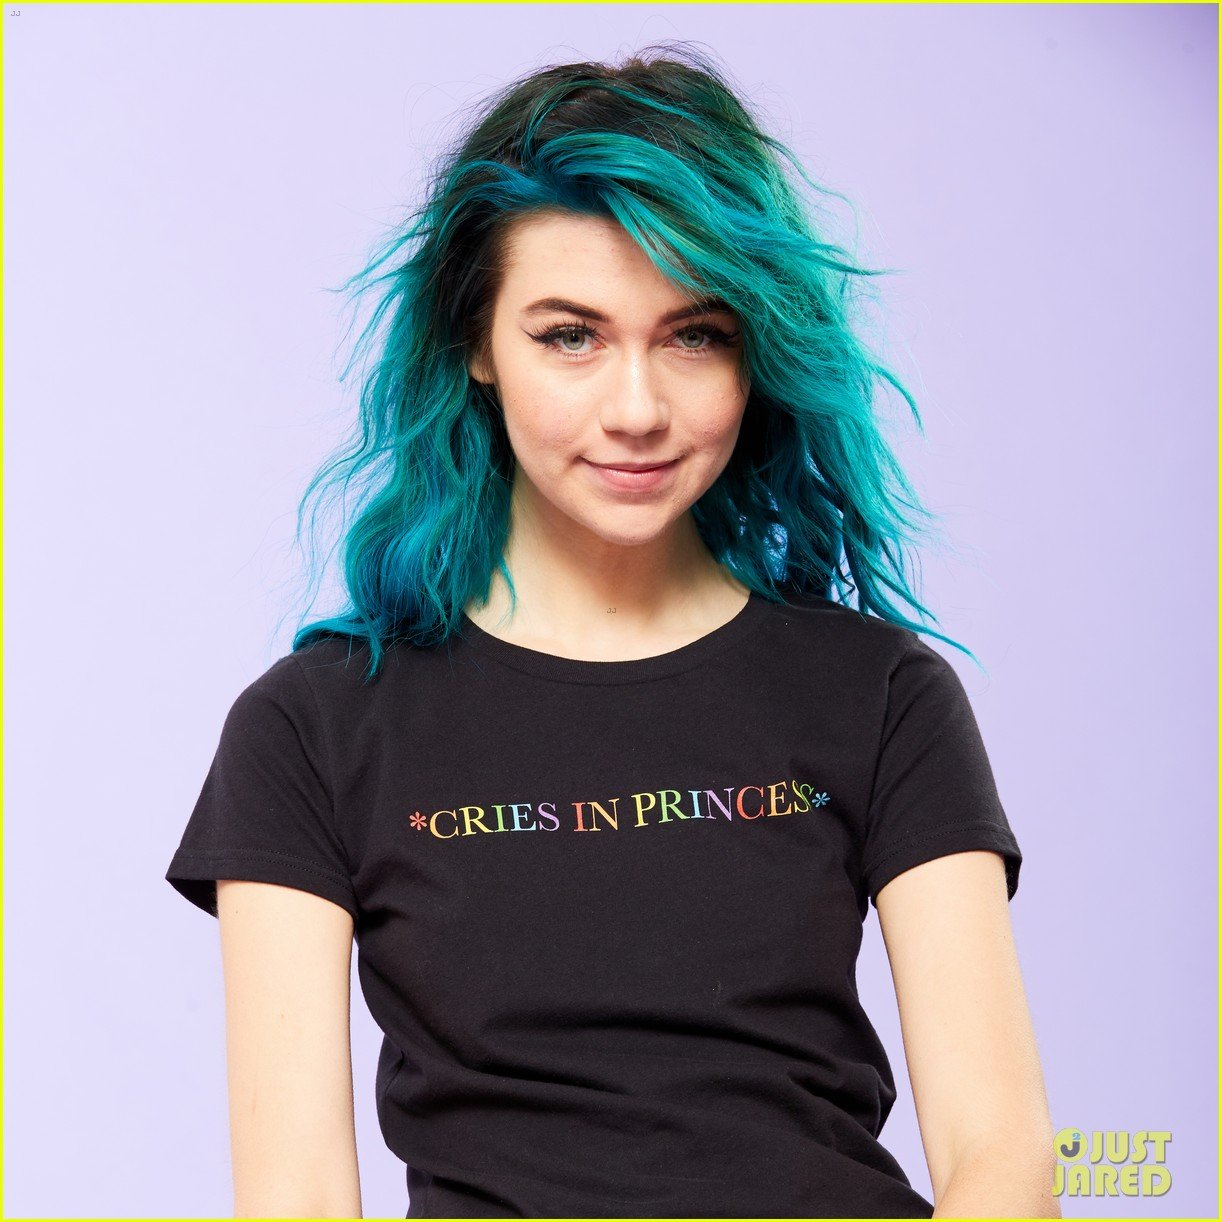 jessie paege has her own hot topic web store dream come true 03